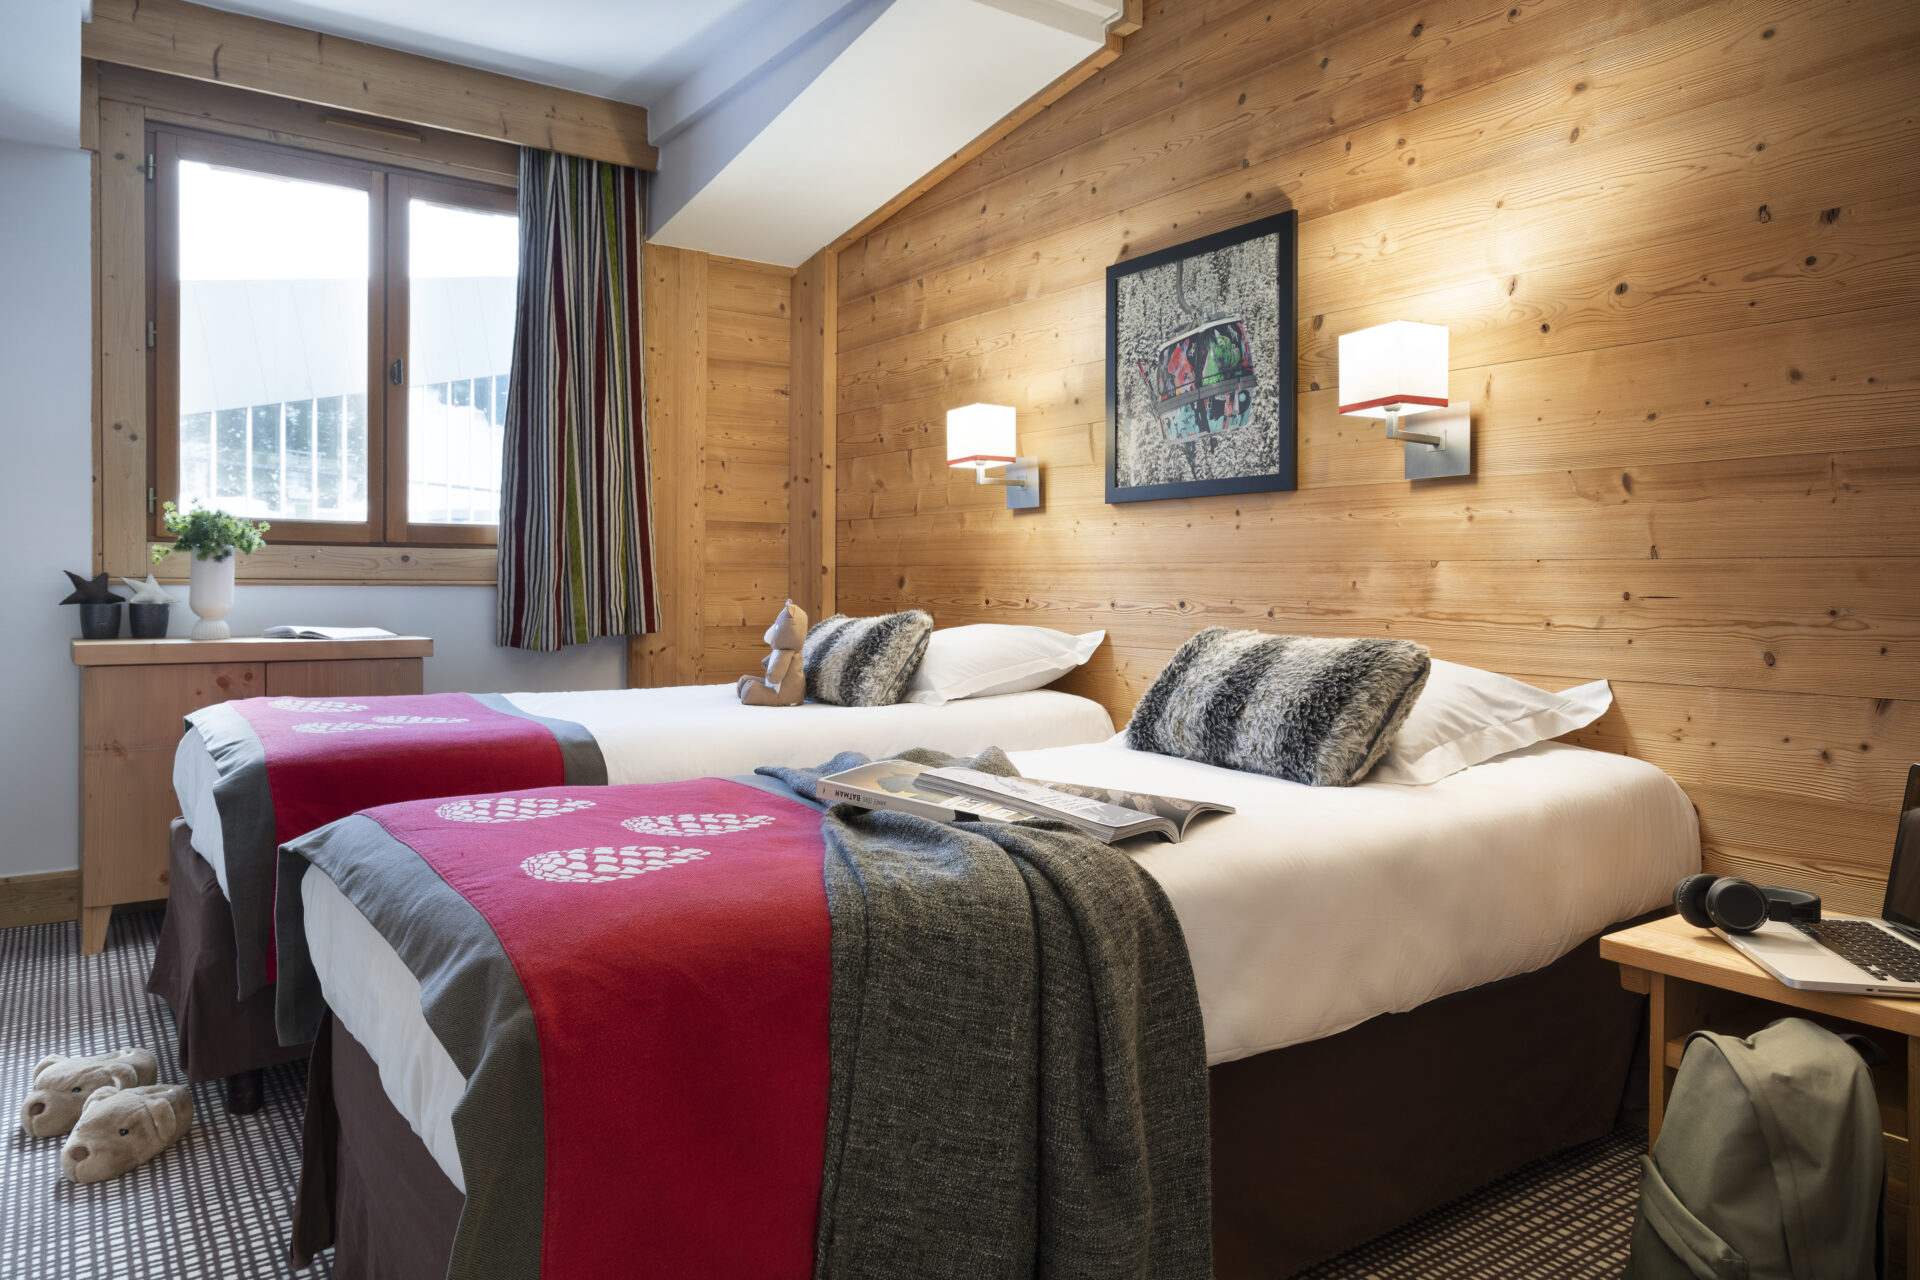 An image of one of the twin bedrooms at Les Chalets du Forum